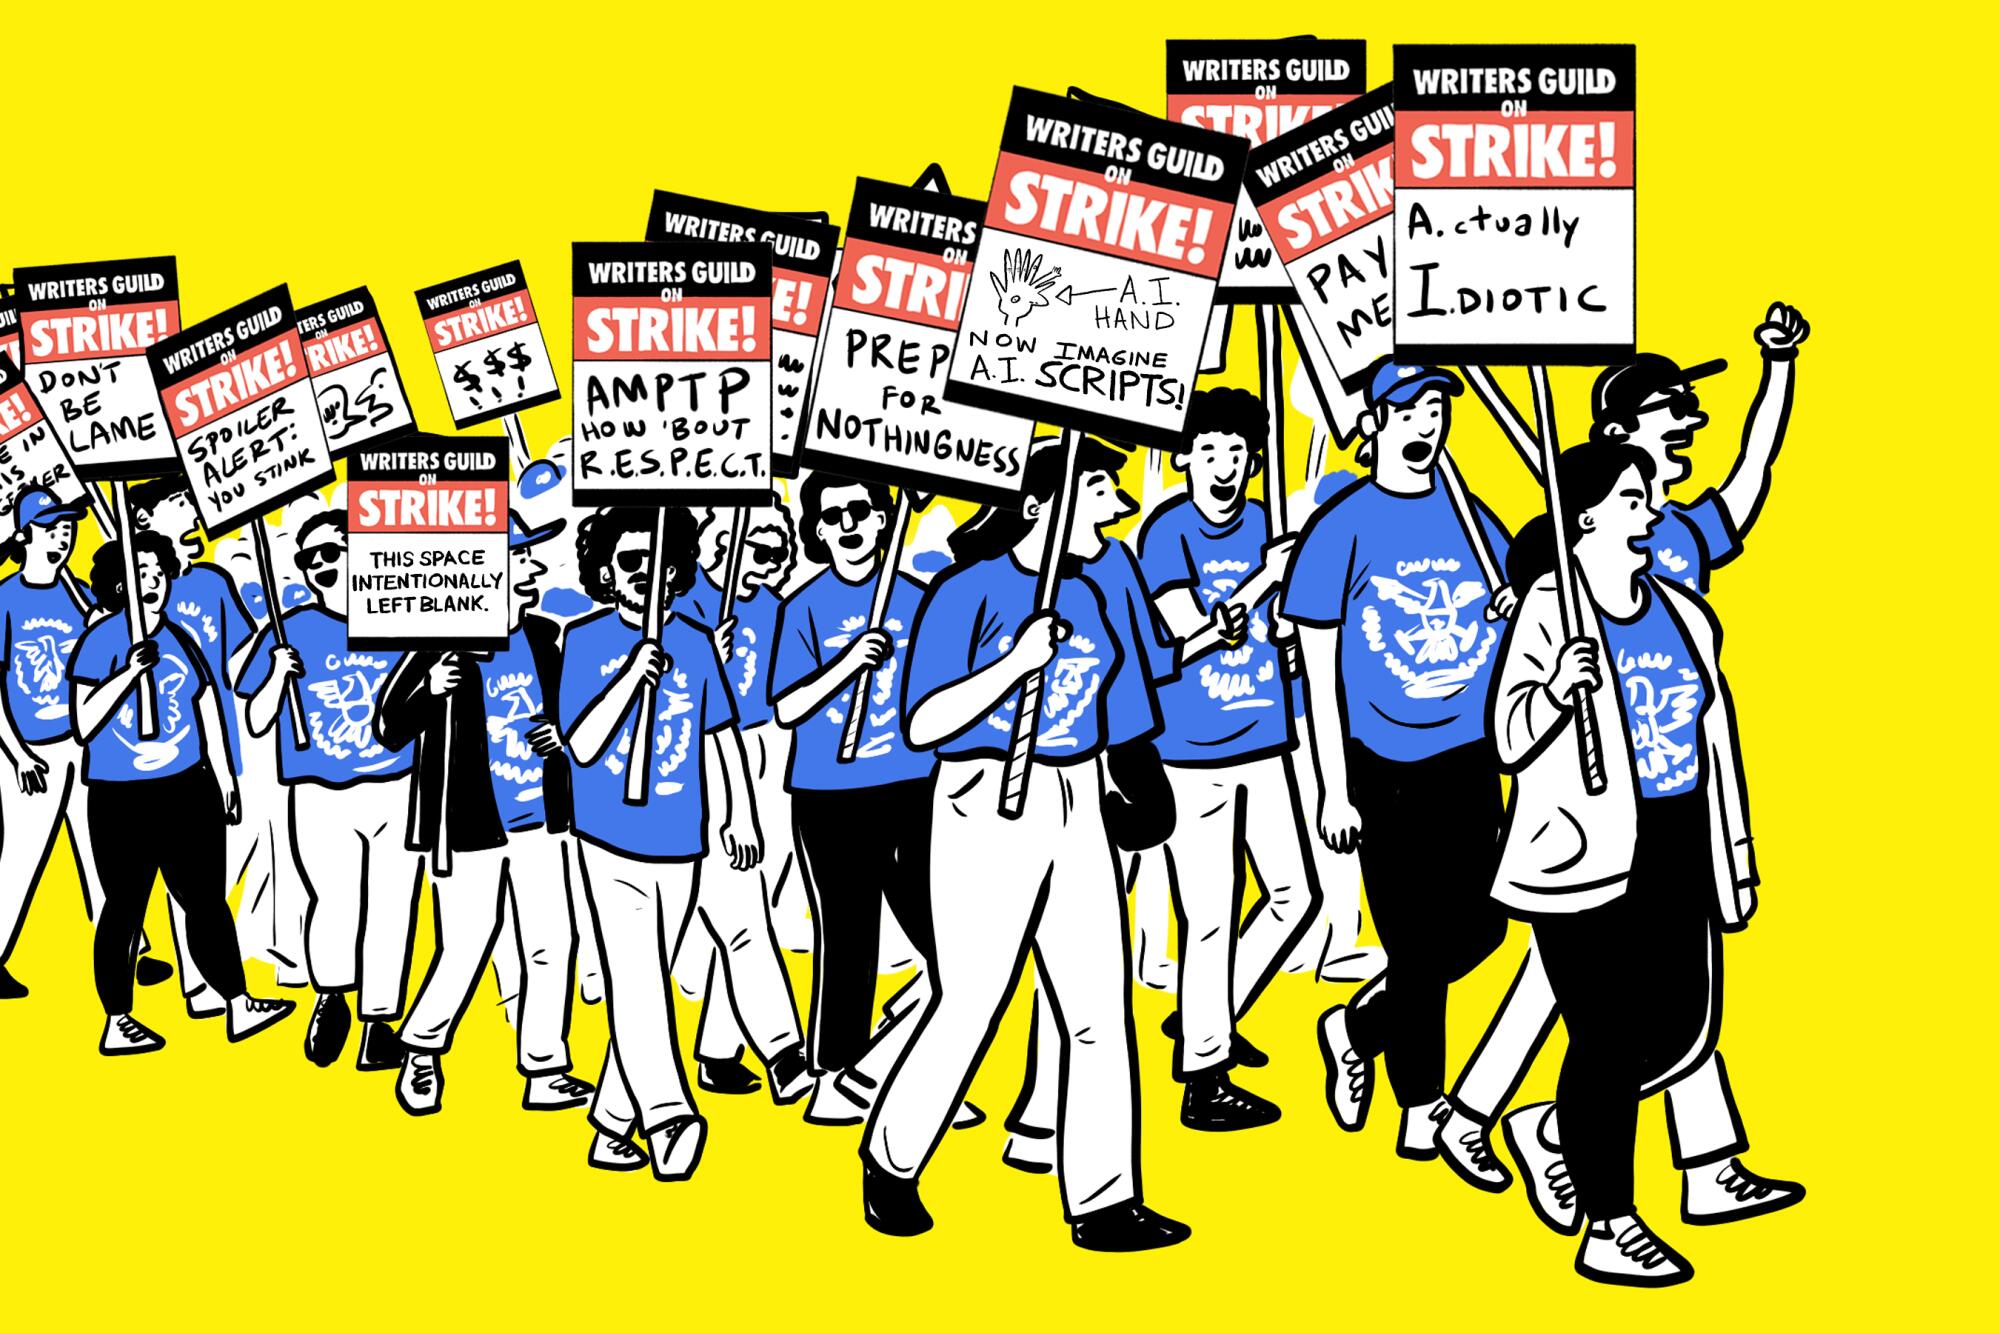 illustration of a crowd of Writers Guild members holding picket signs